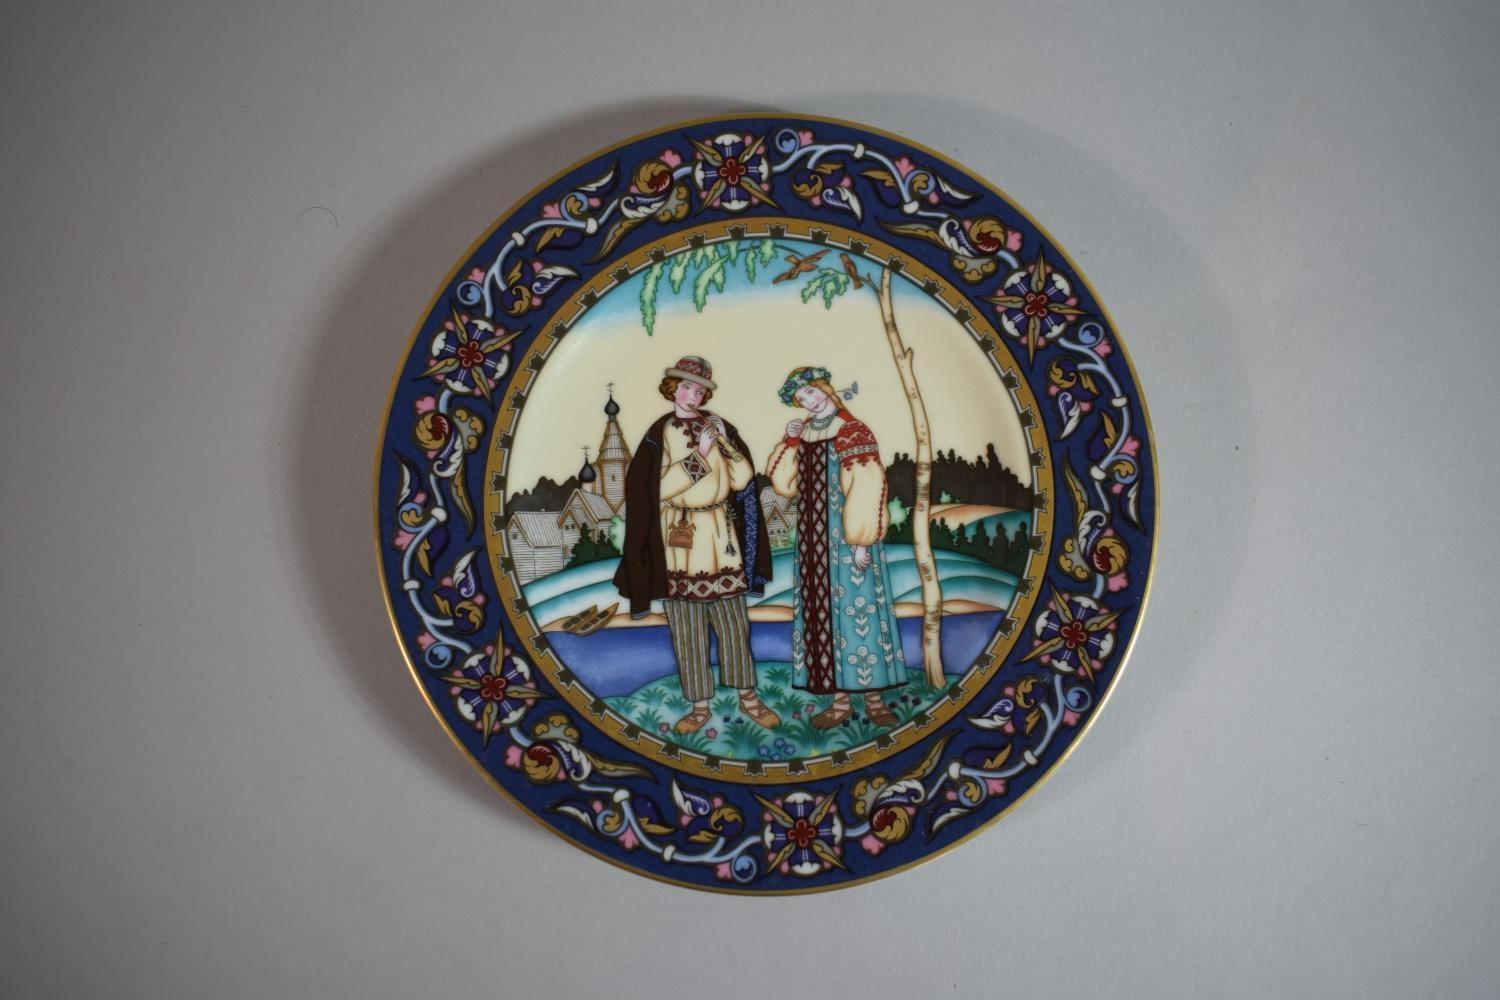 A Collection of Five German Heinrich Villeroy & Boch Plates From the Russian Fairy Tales - Image 15 of 17